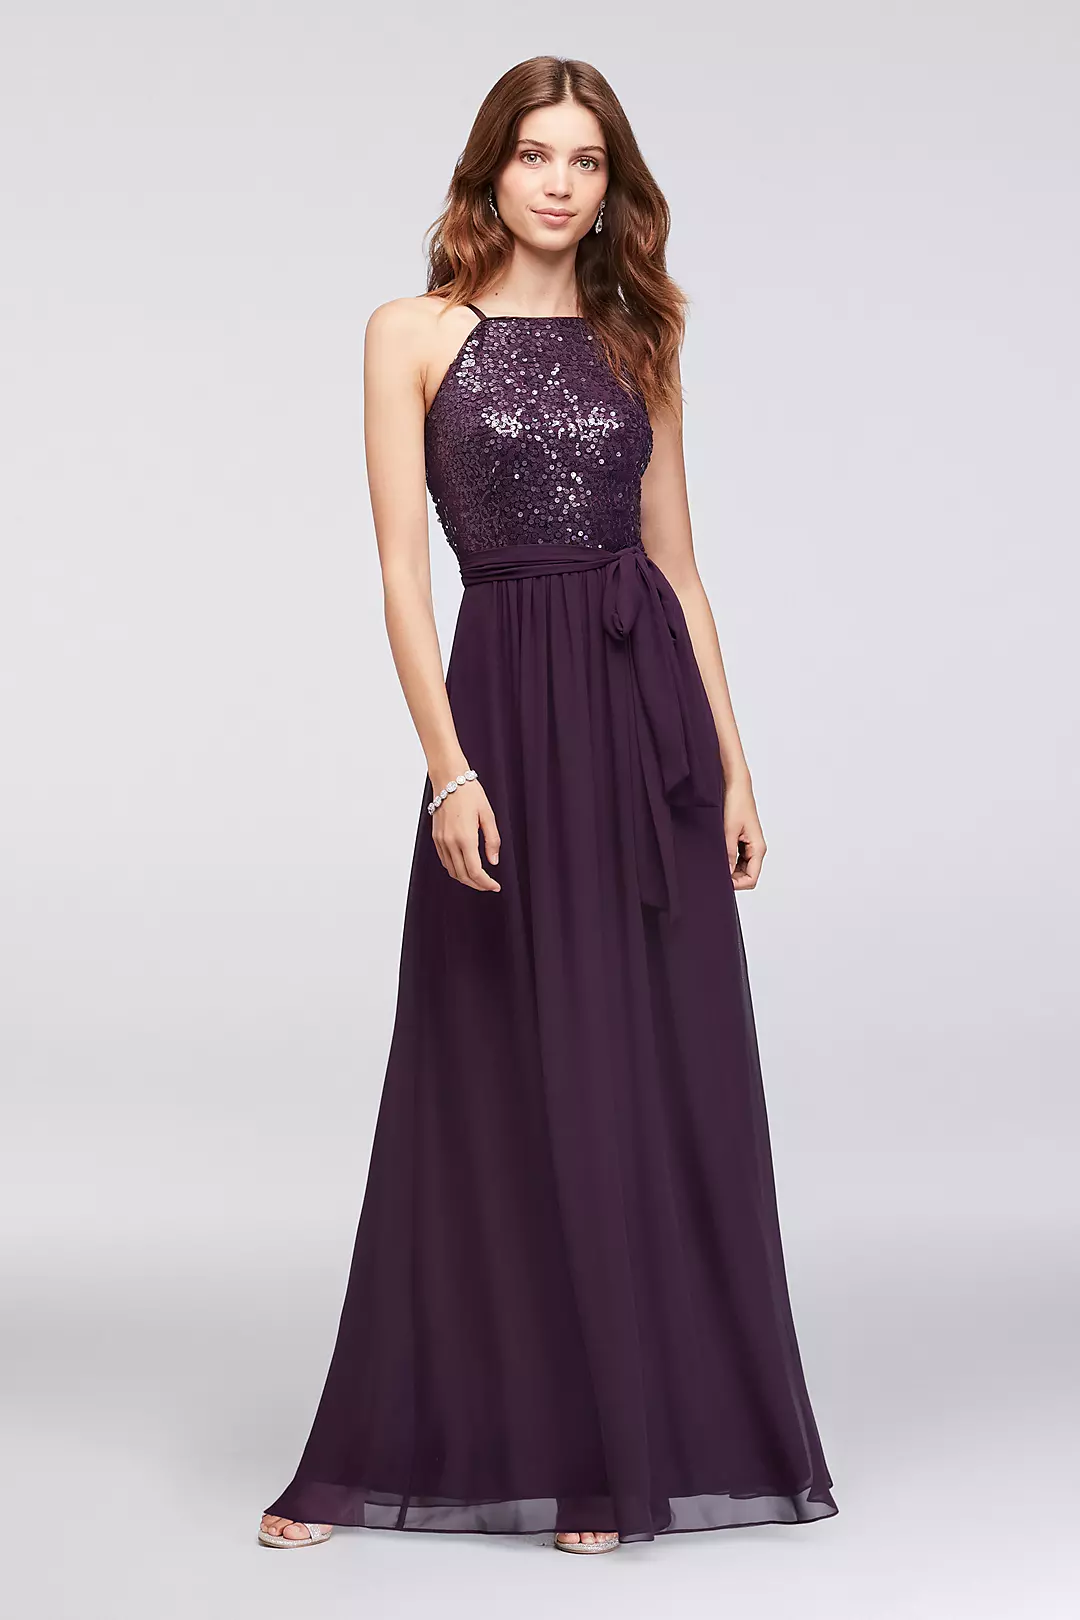 Chiffon High-Neck Bridesmaid Dress with Sequins Image